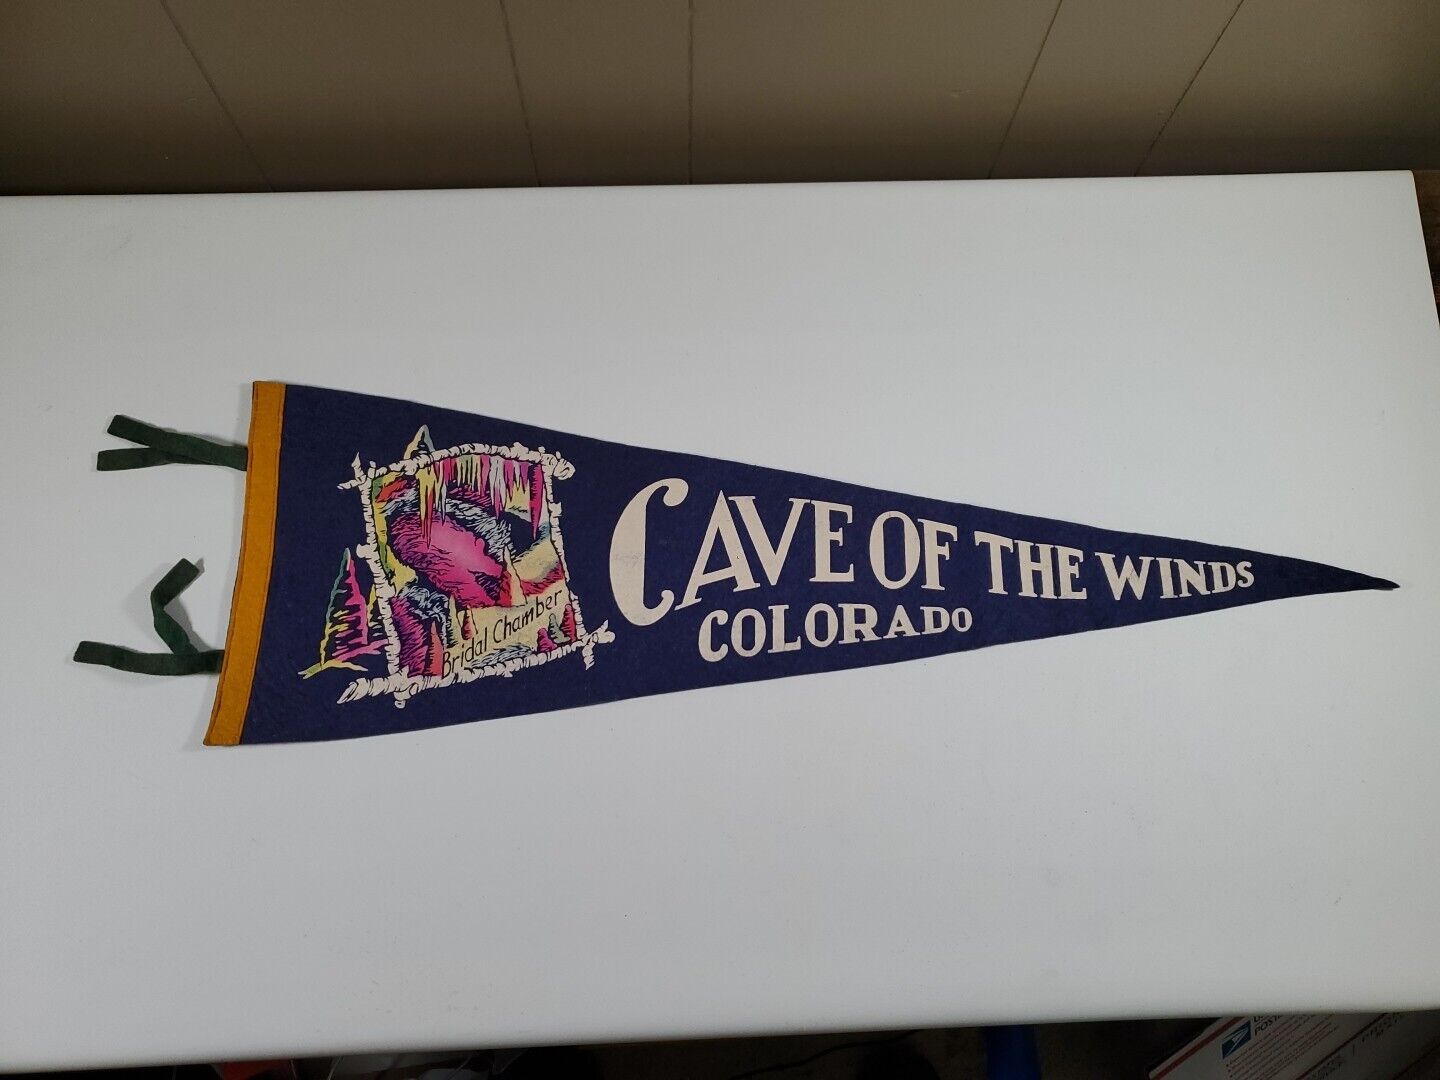 Cave Of The Wimds Colorado Bridal Chamber Felt Pennant Flag